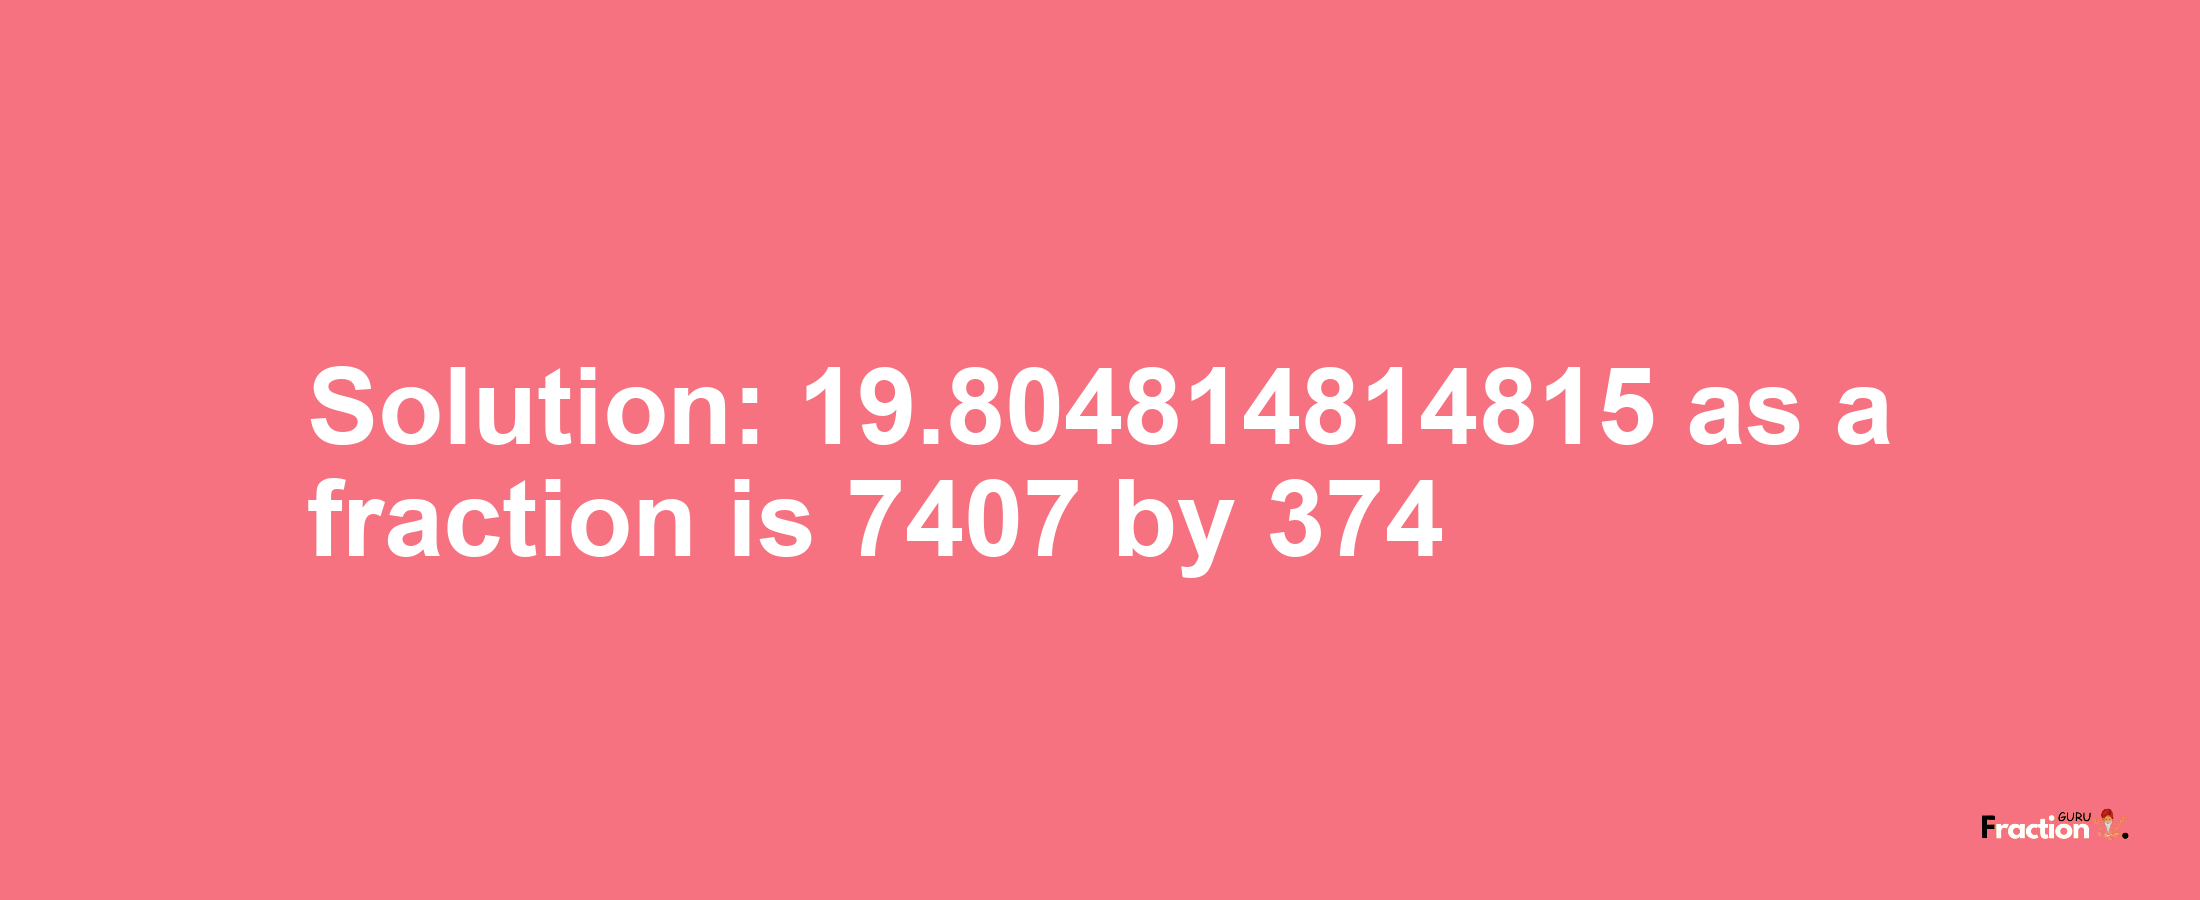 Solution:19.804814814815 as a fraction is 7407/374